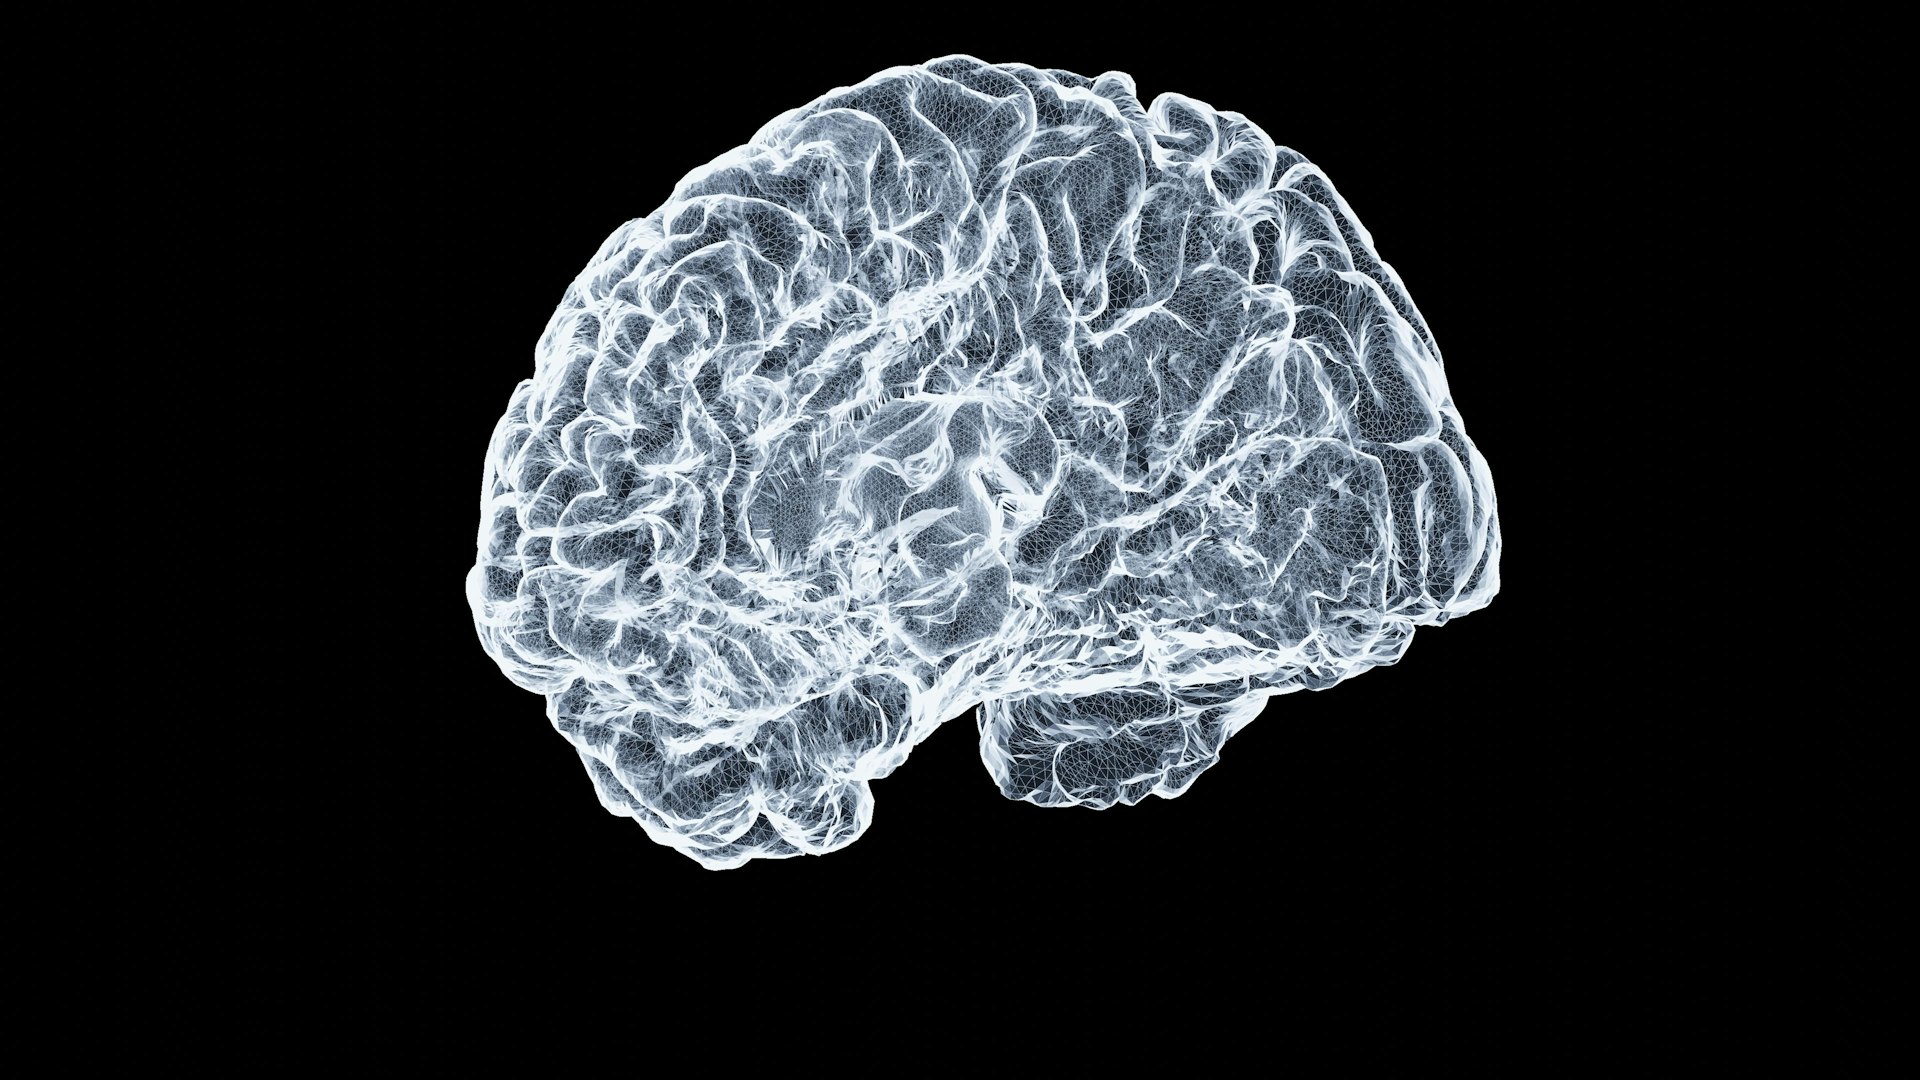 a close up of a human brain on a black background